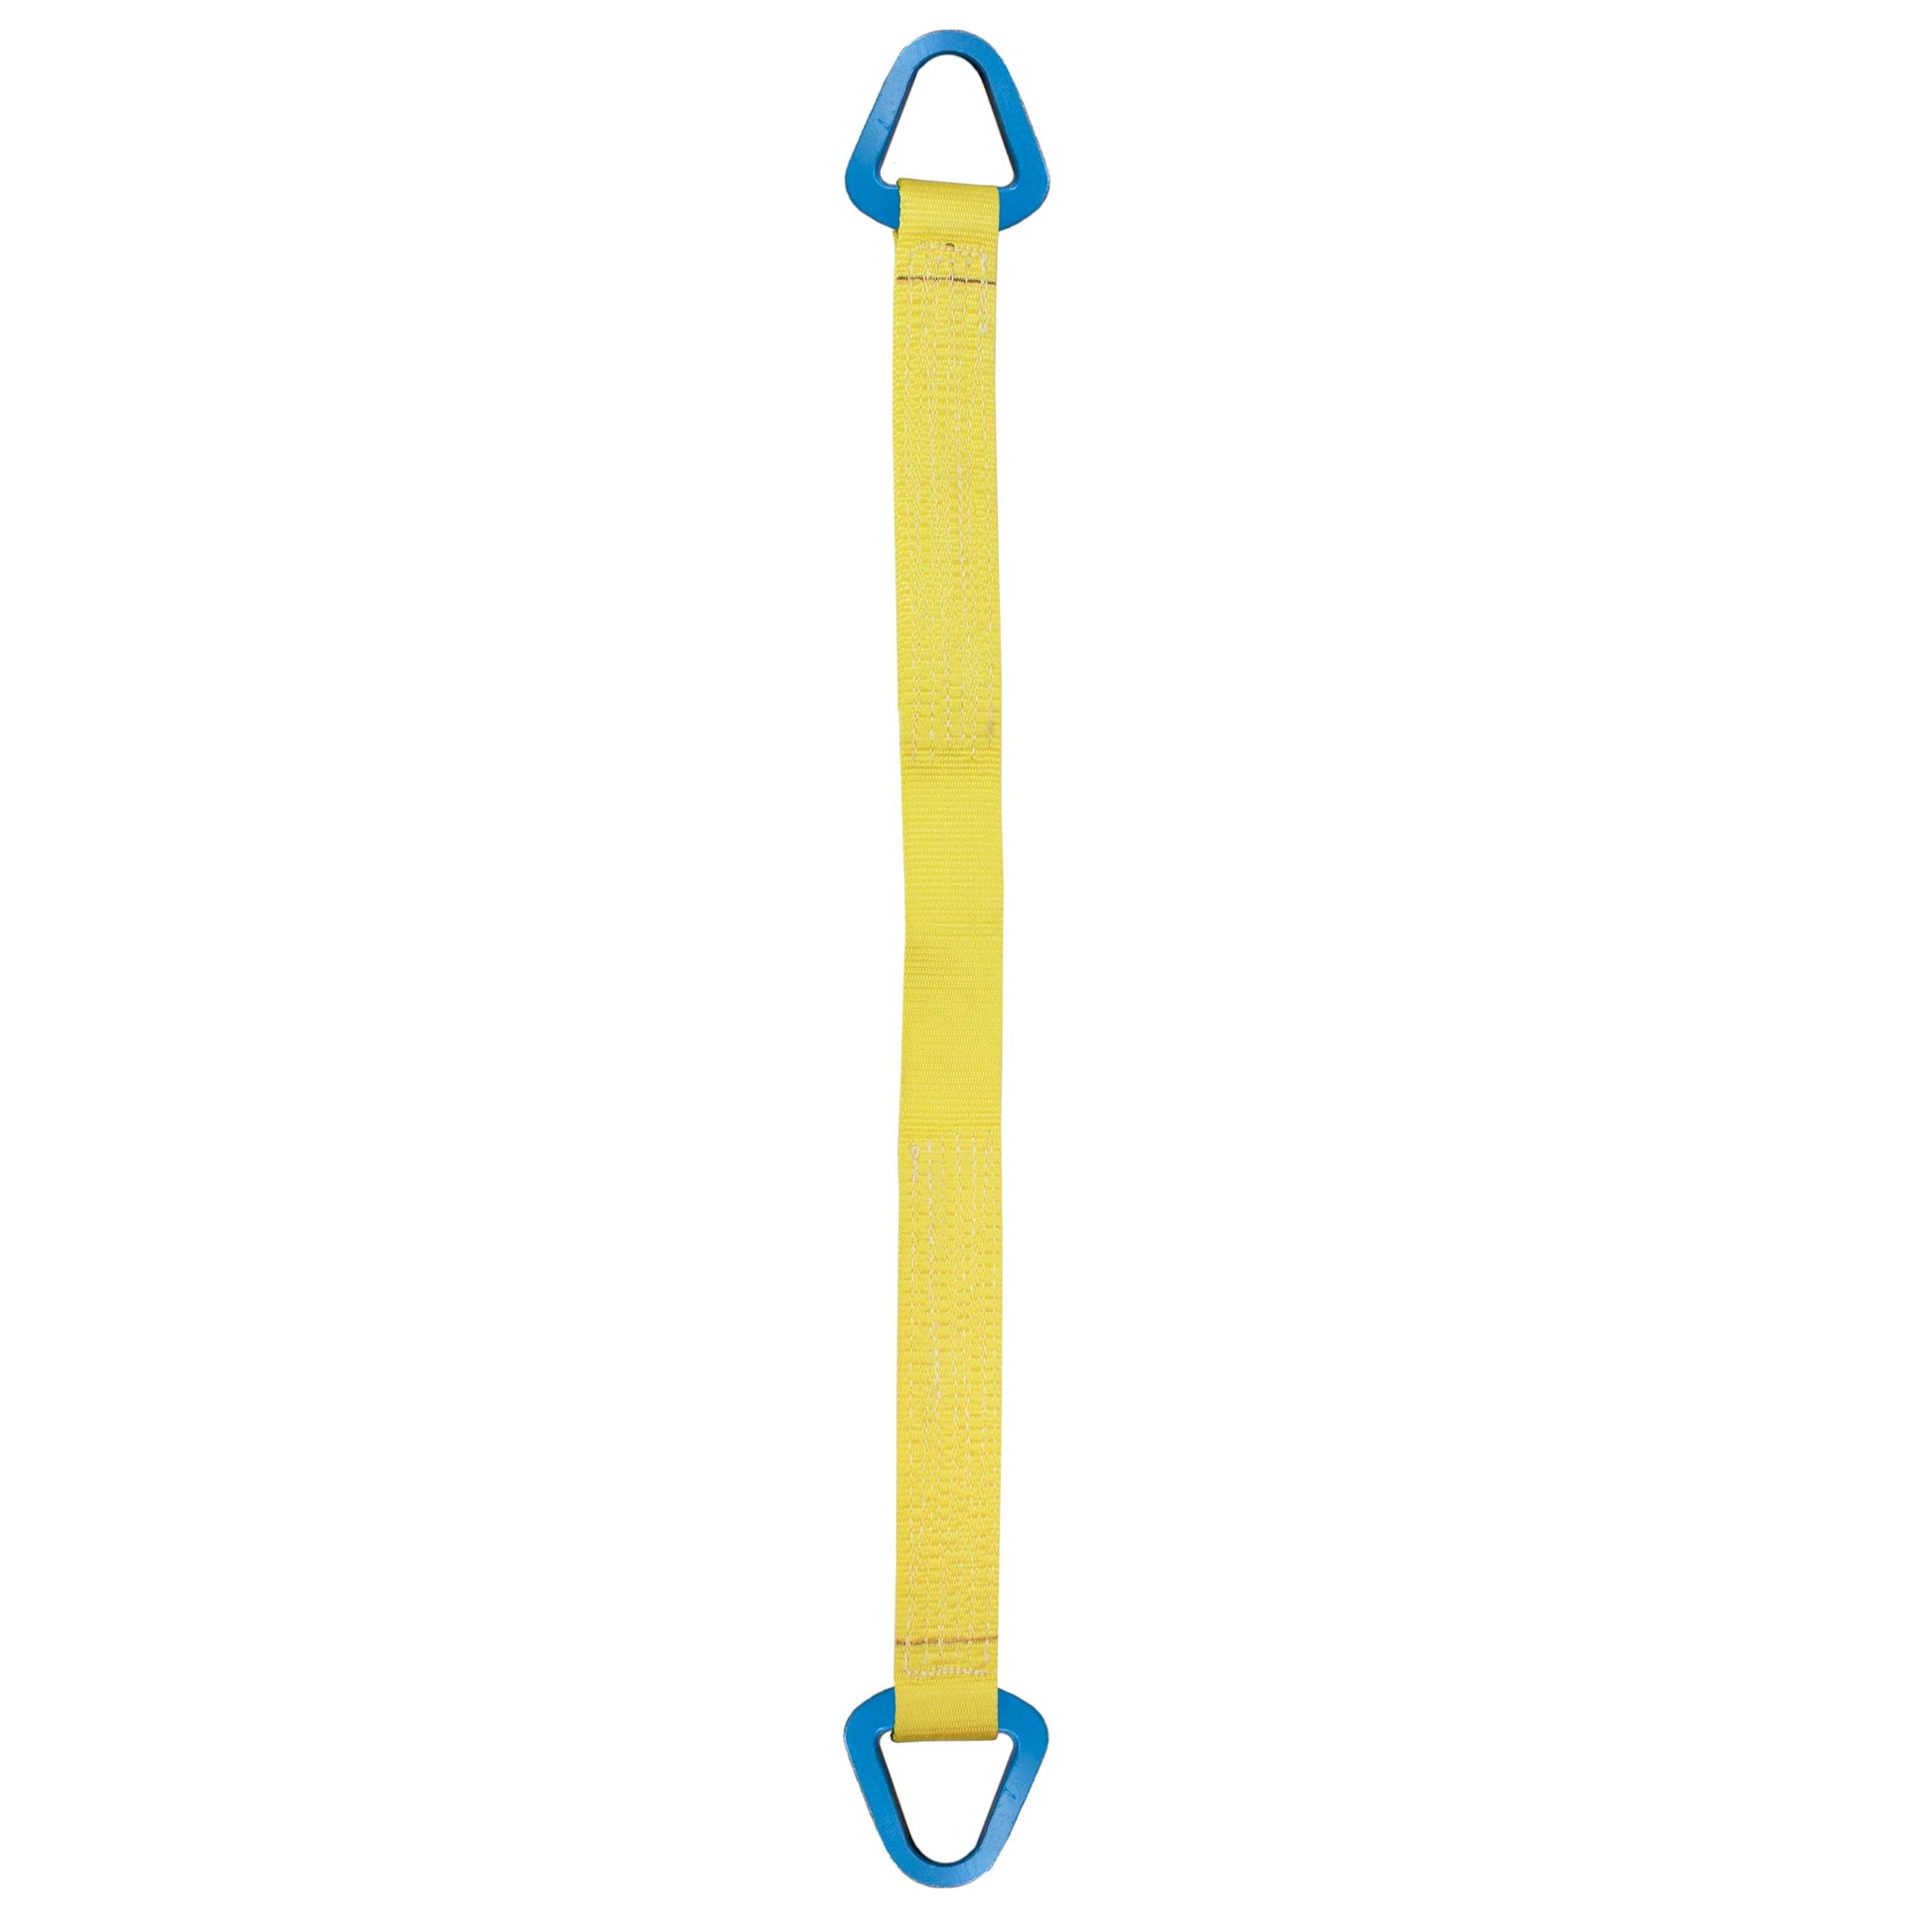 Nylon Lifting Sling Triangle 12 inch x 8 foot 2ply image 1 of 2